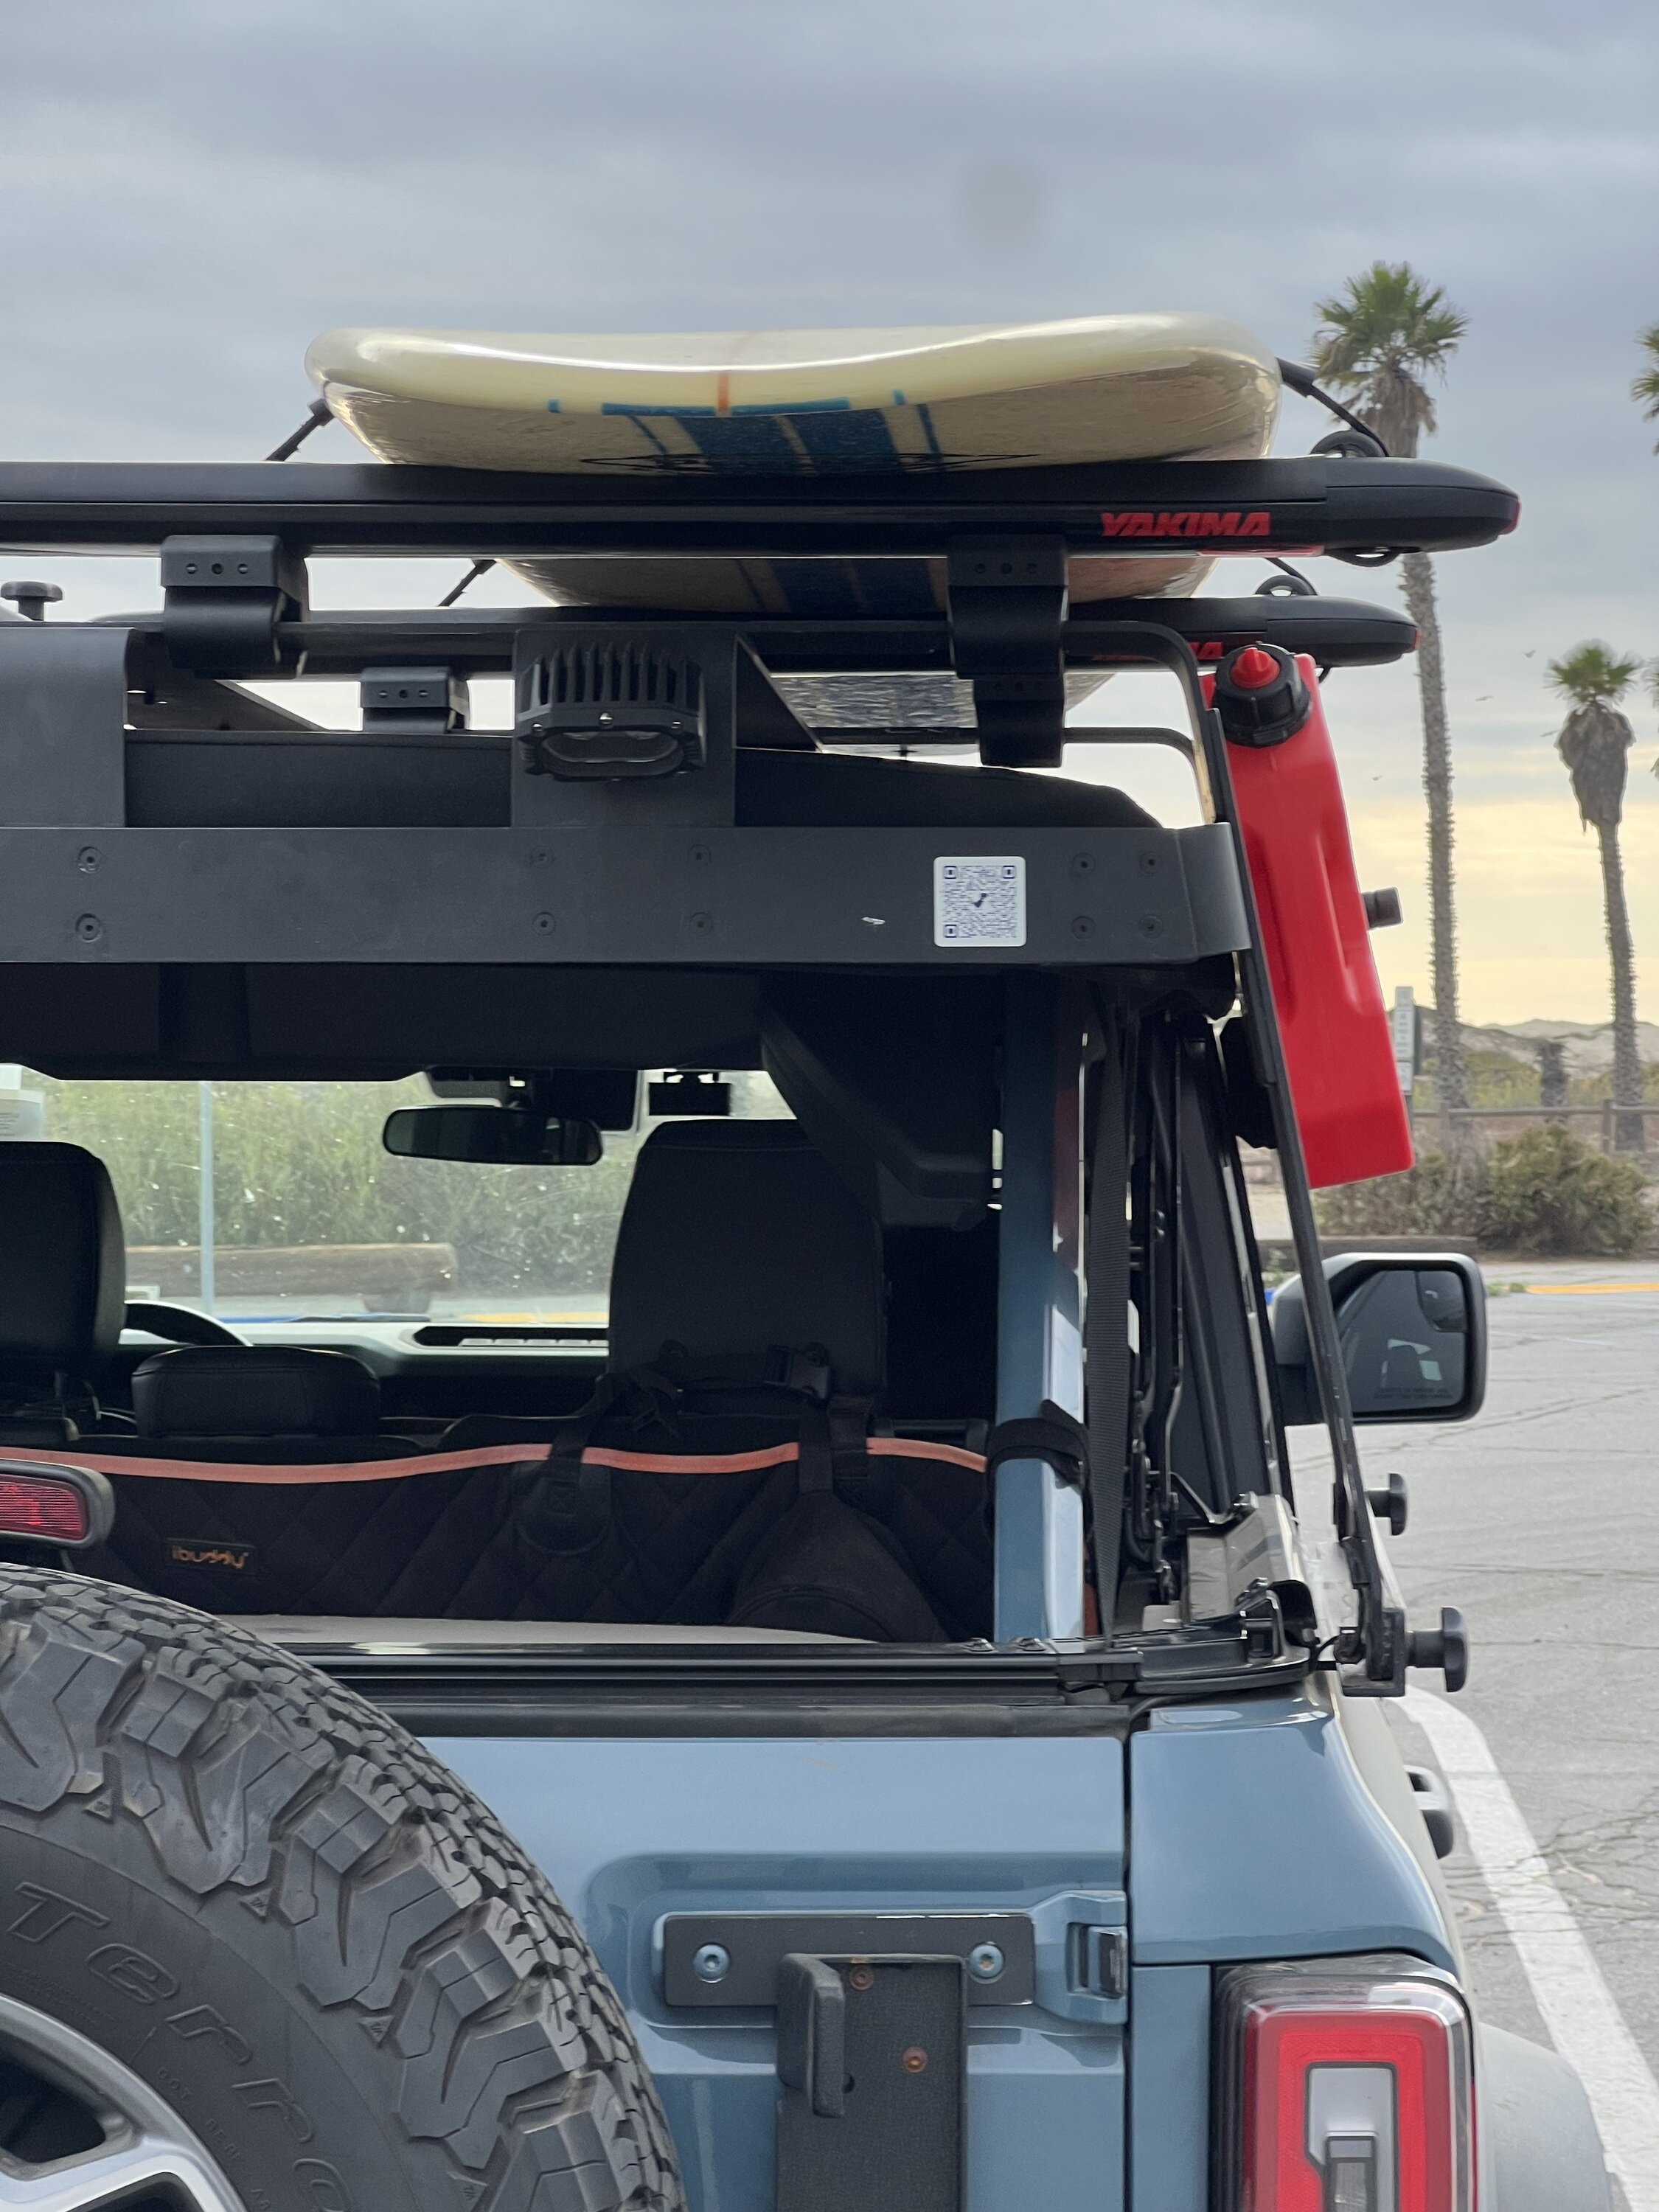 Ford Bronco 22 Winty Soft Top Roof Rack for Ford Bronco IMG_5406